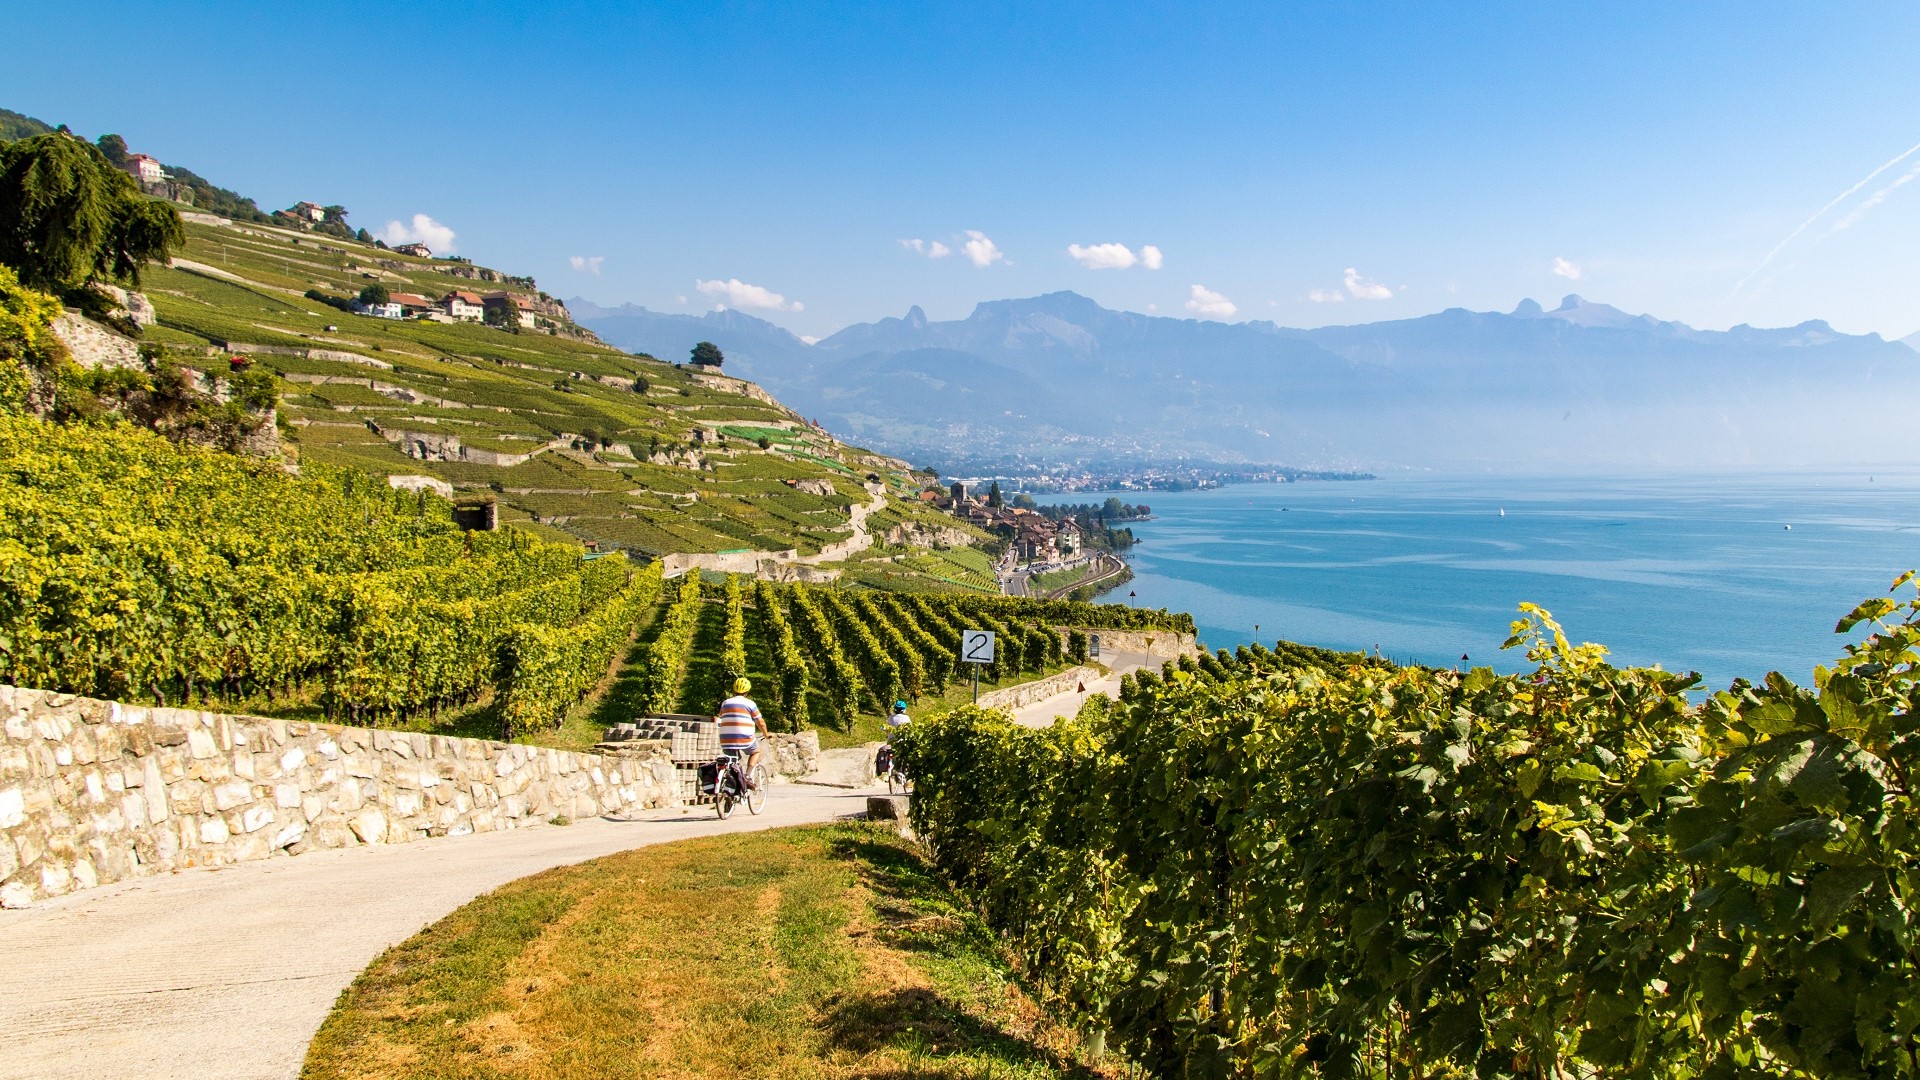 Lavaux Vineyards bikers on the road with view of the alps and Lake Geneva in Switxerland